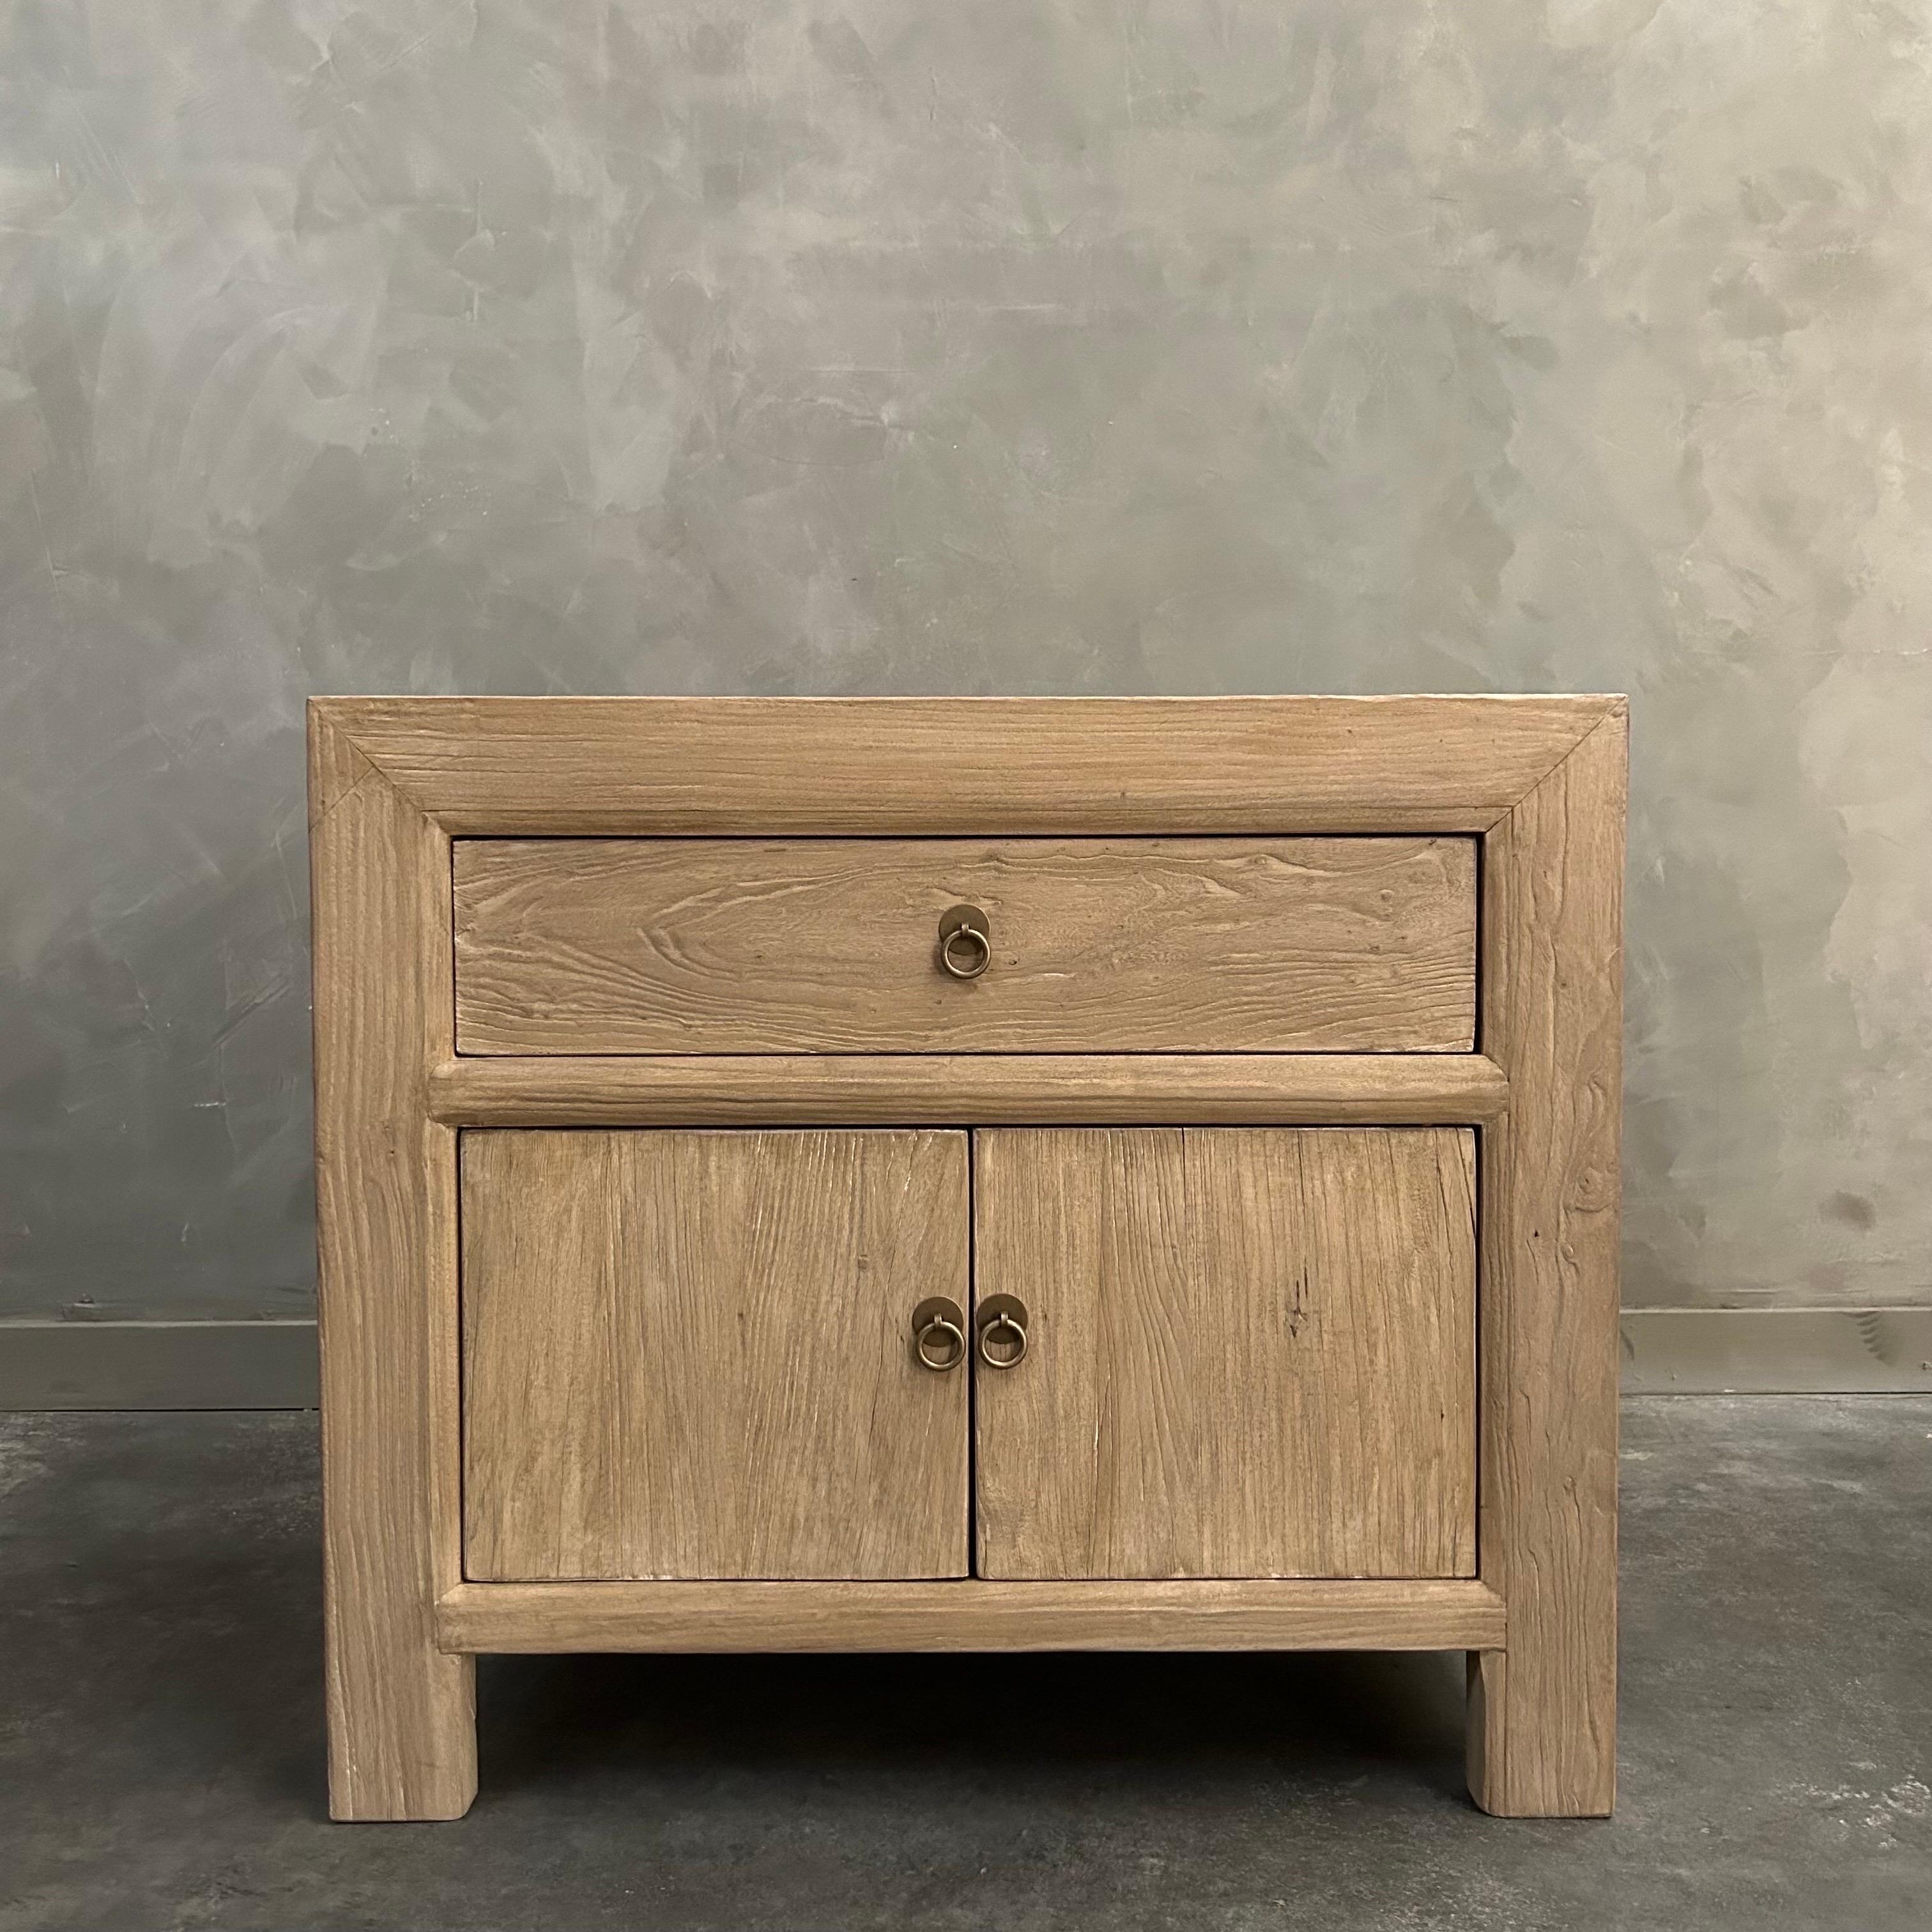 BH COLLECTION
The most authentic materials are hand selected, and hours of hand-craftsmanship go into each piece, creating each and every piece, no one is exactly alike. Solid elm wood finished with a natural wax.
The artisanal construction methods